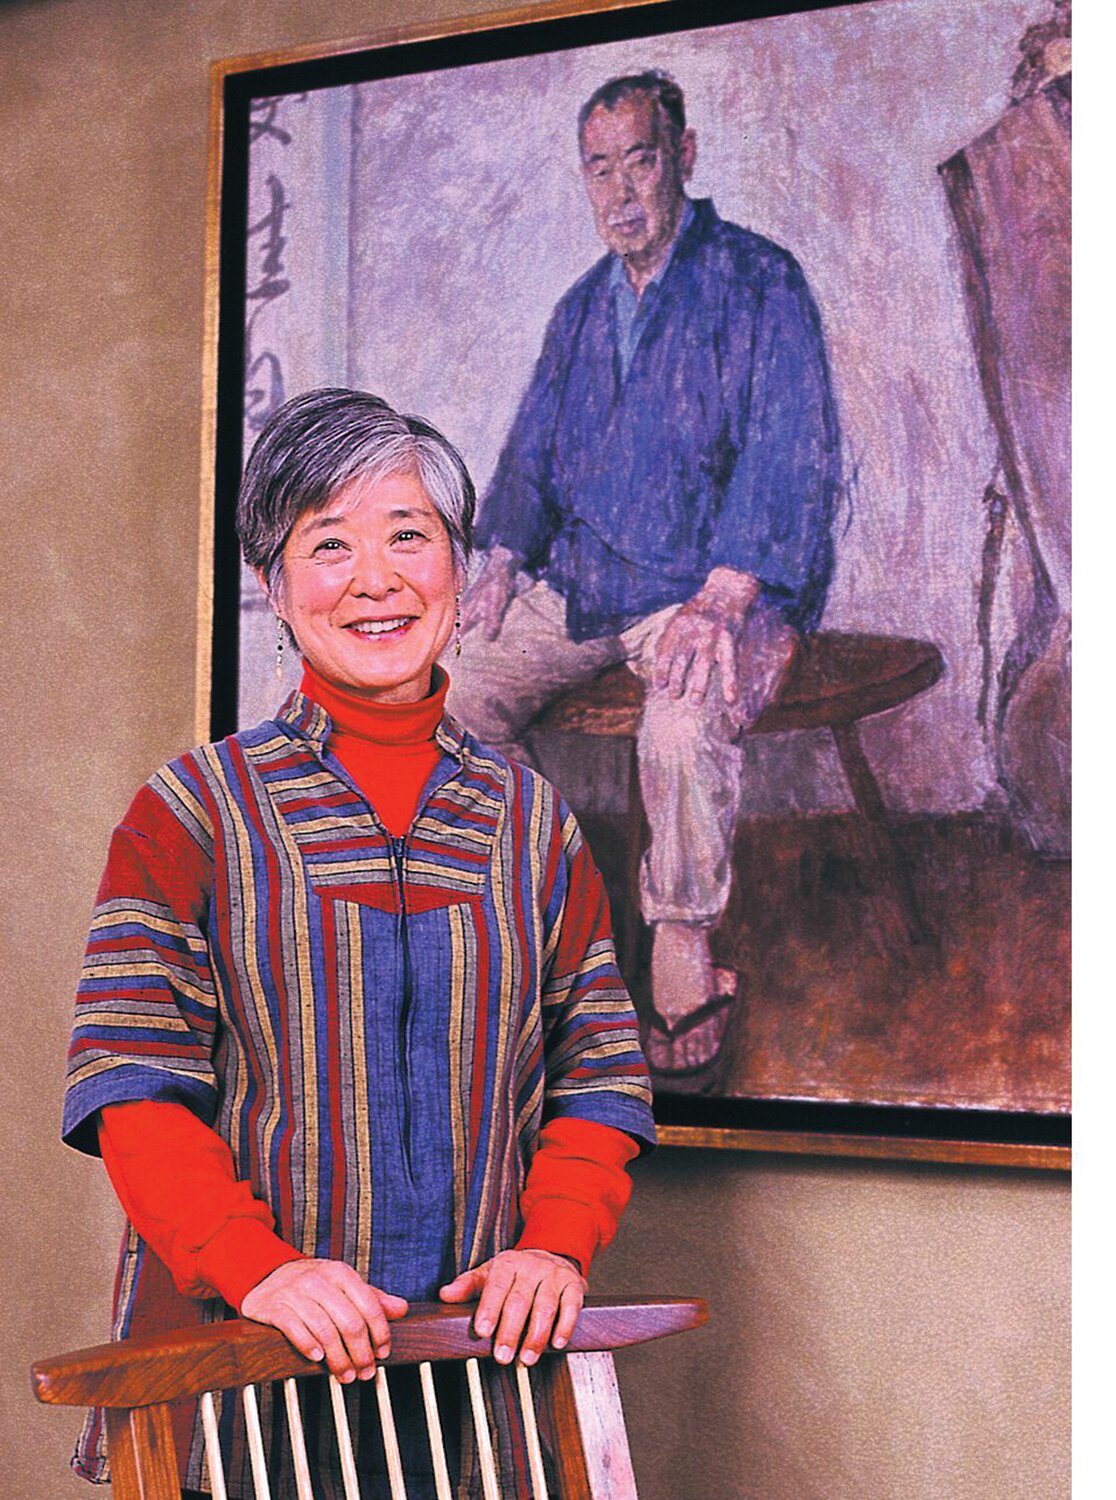 Mira Nakashima stands in front of a portrait of her father, George, at the Michener Art Museum in Doylestown.